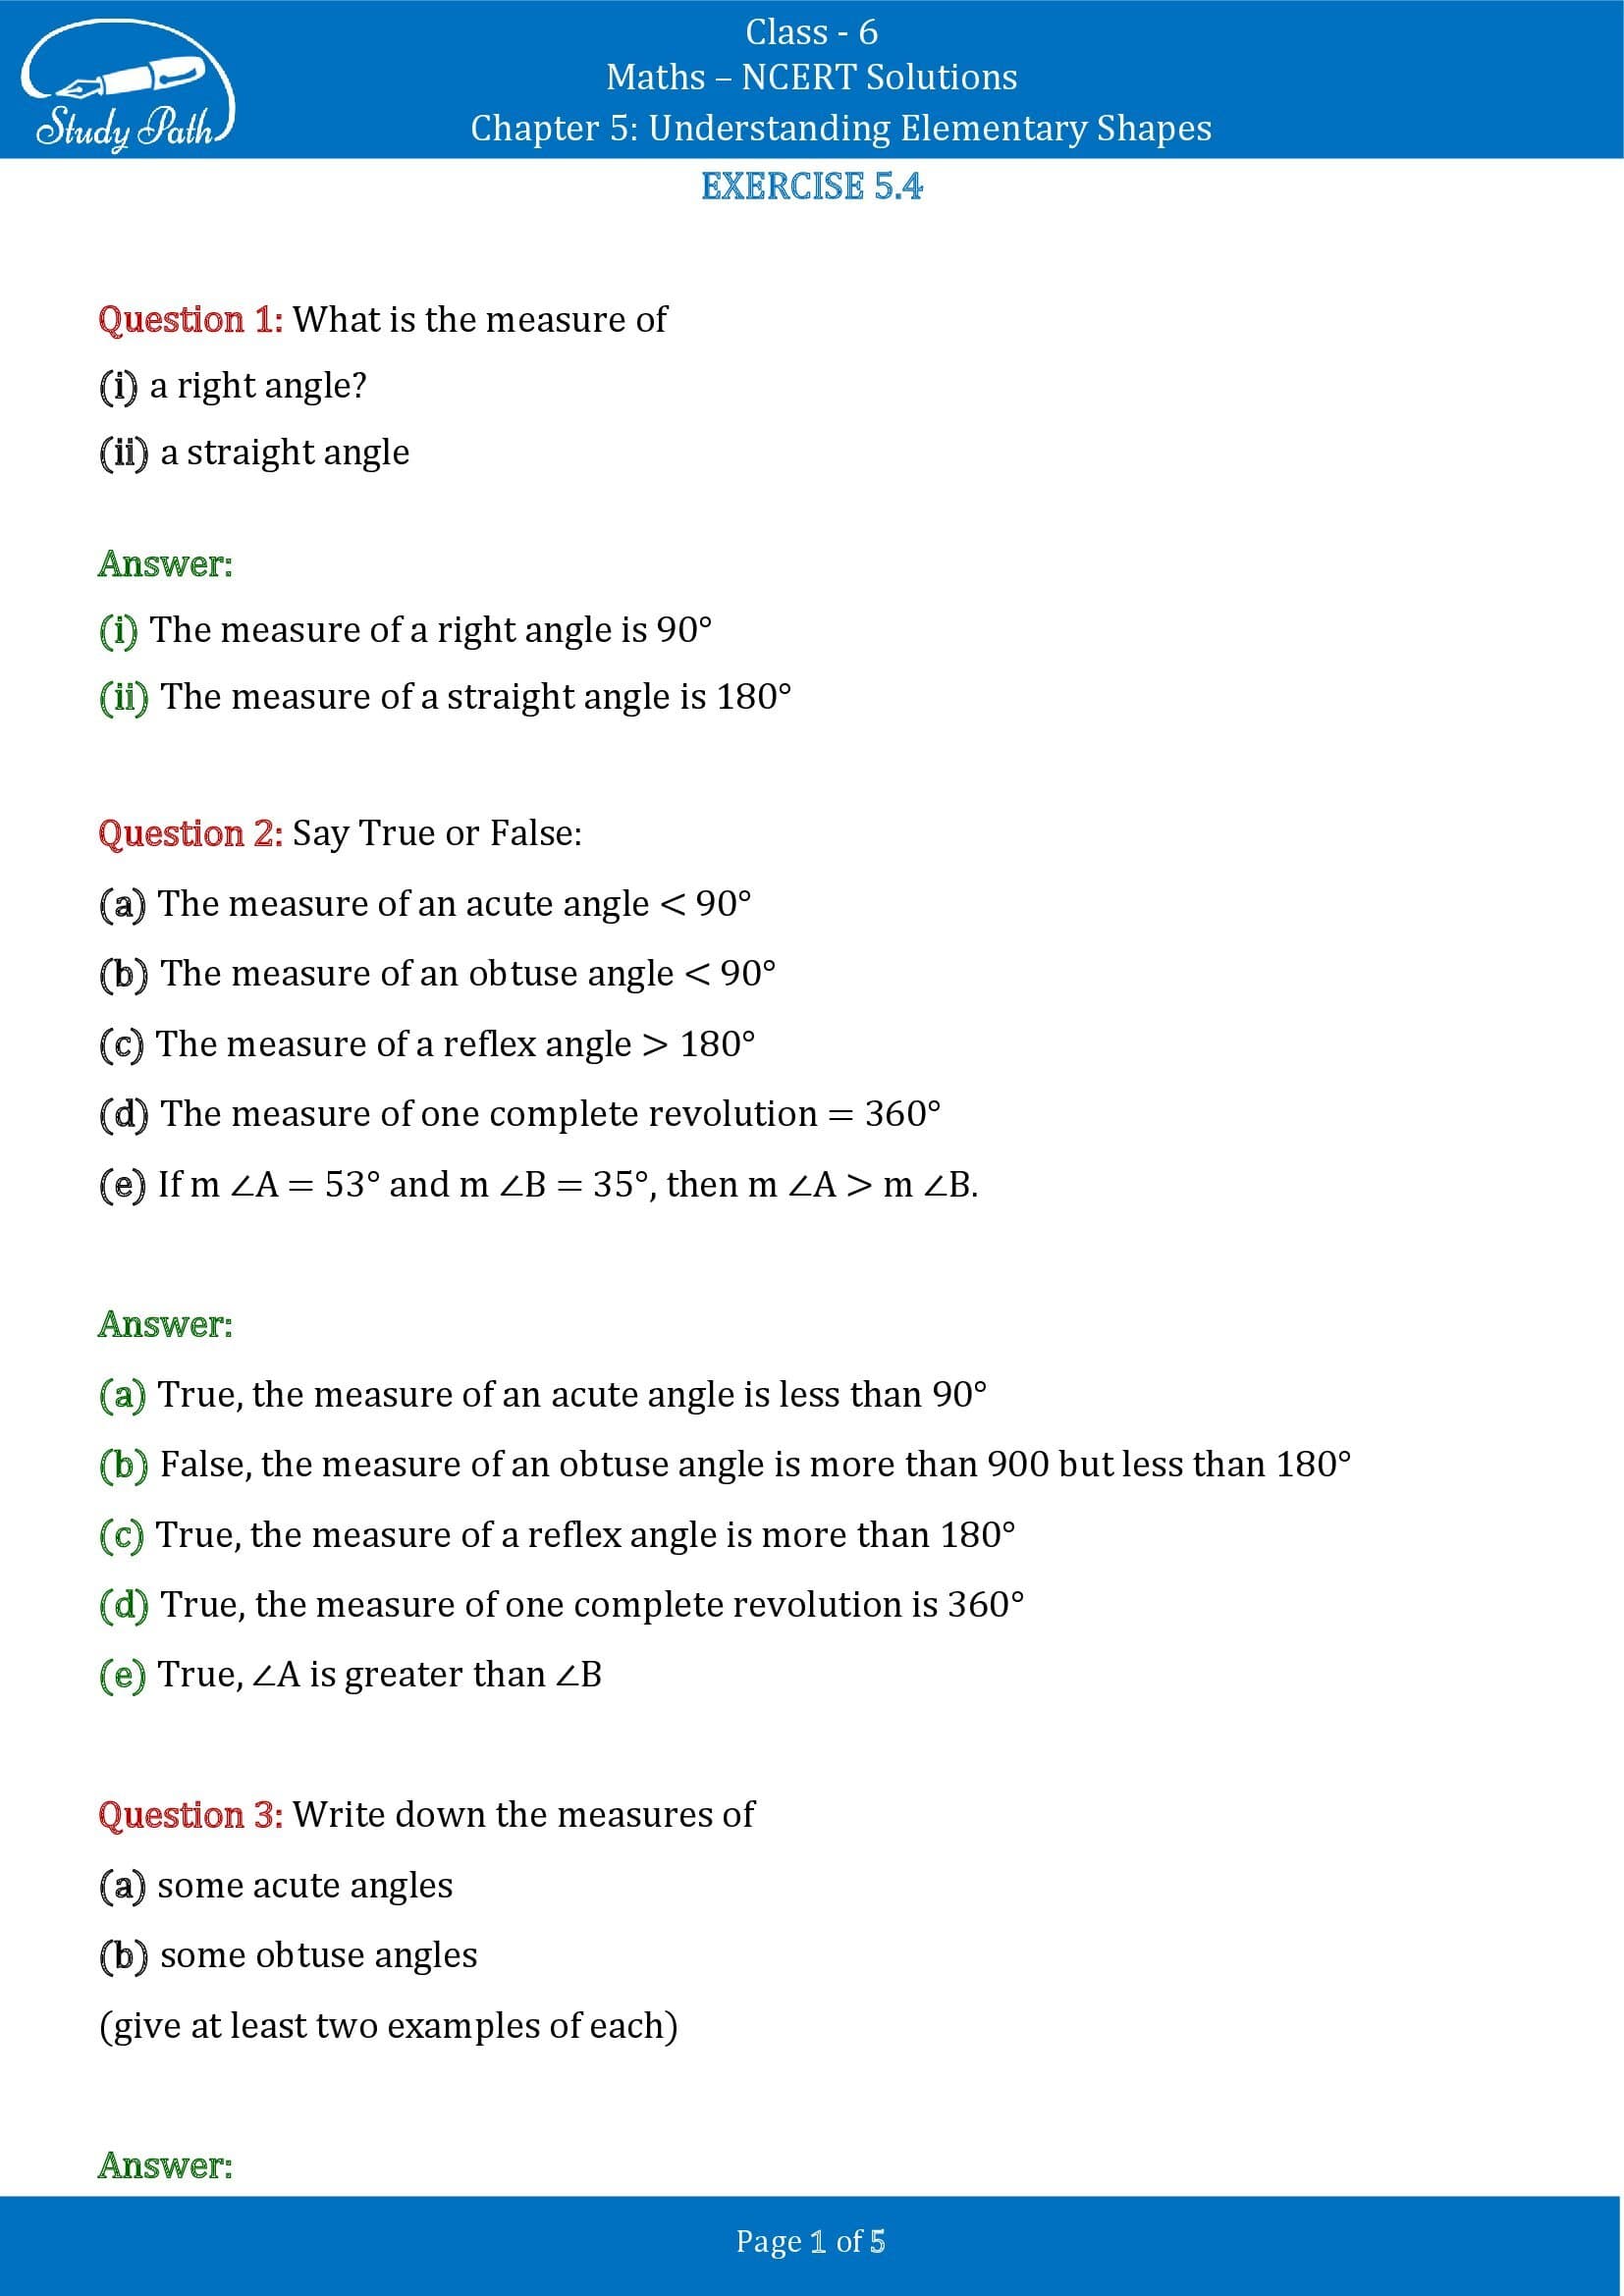 NCERT Solutions for Class 6 Maths Chapter 5 Understanding Elementary Shapes Exercise 5.4 0001